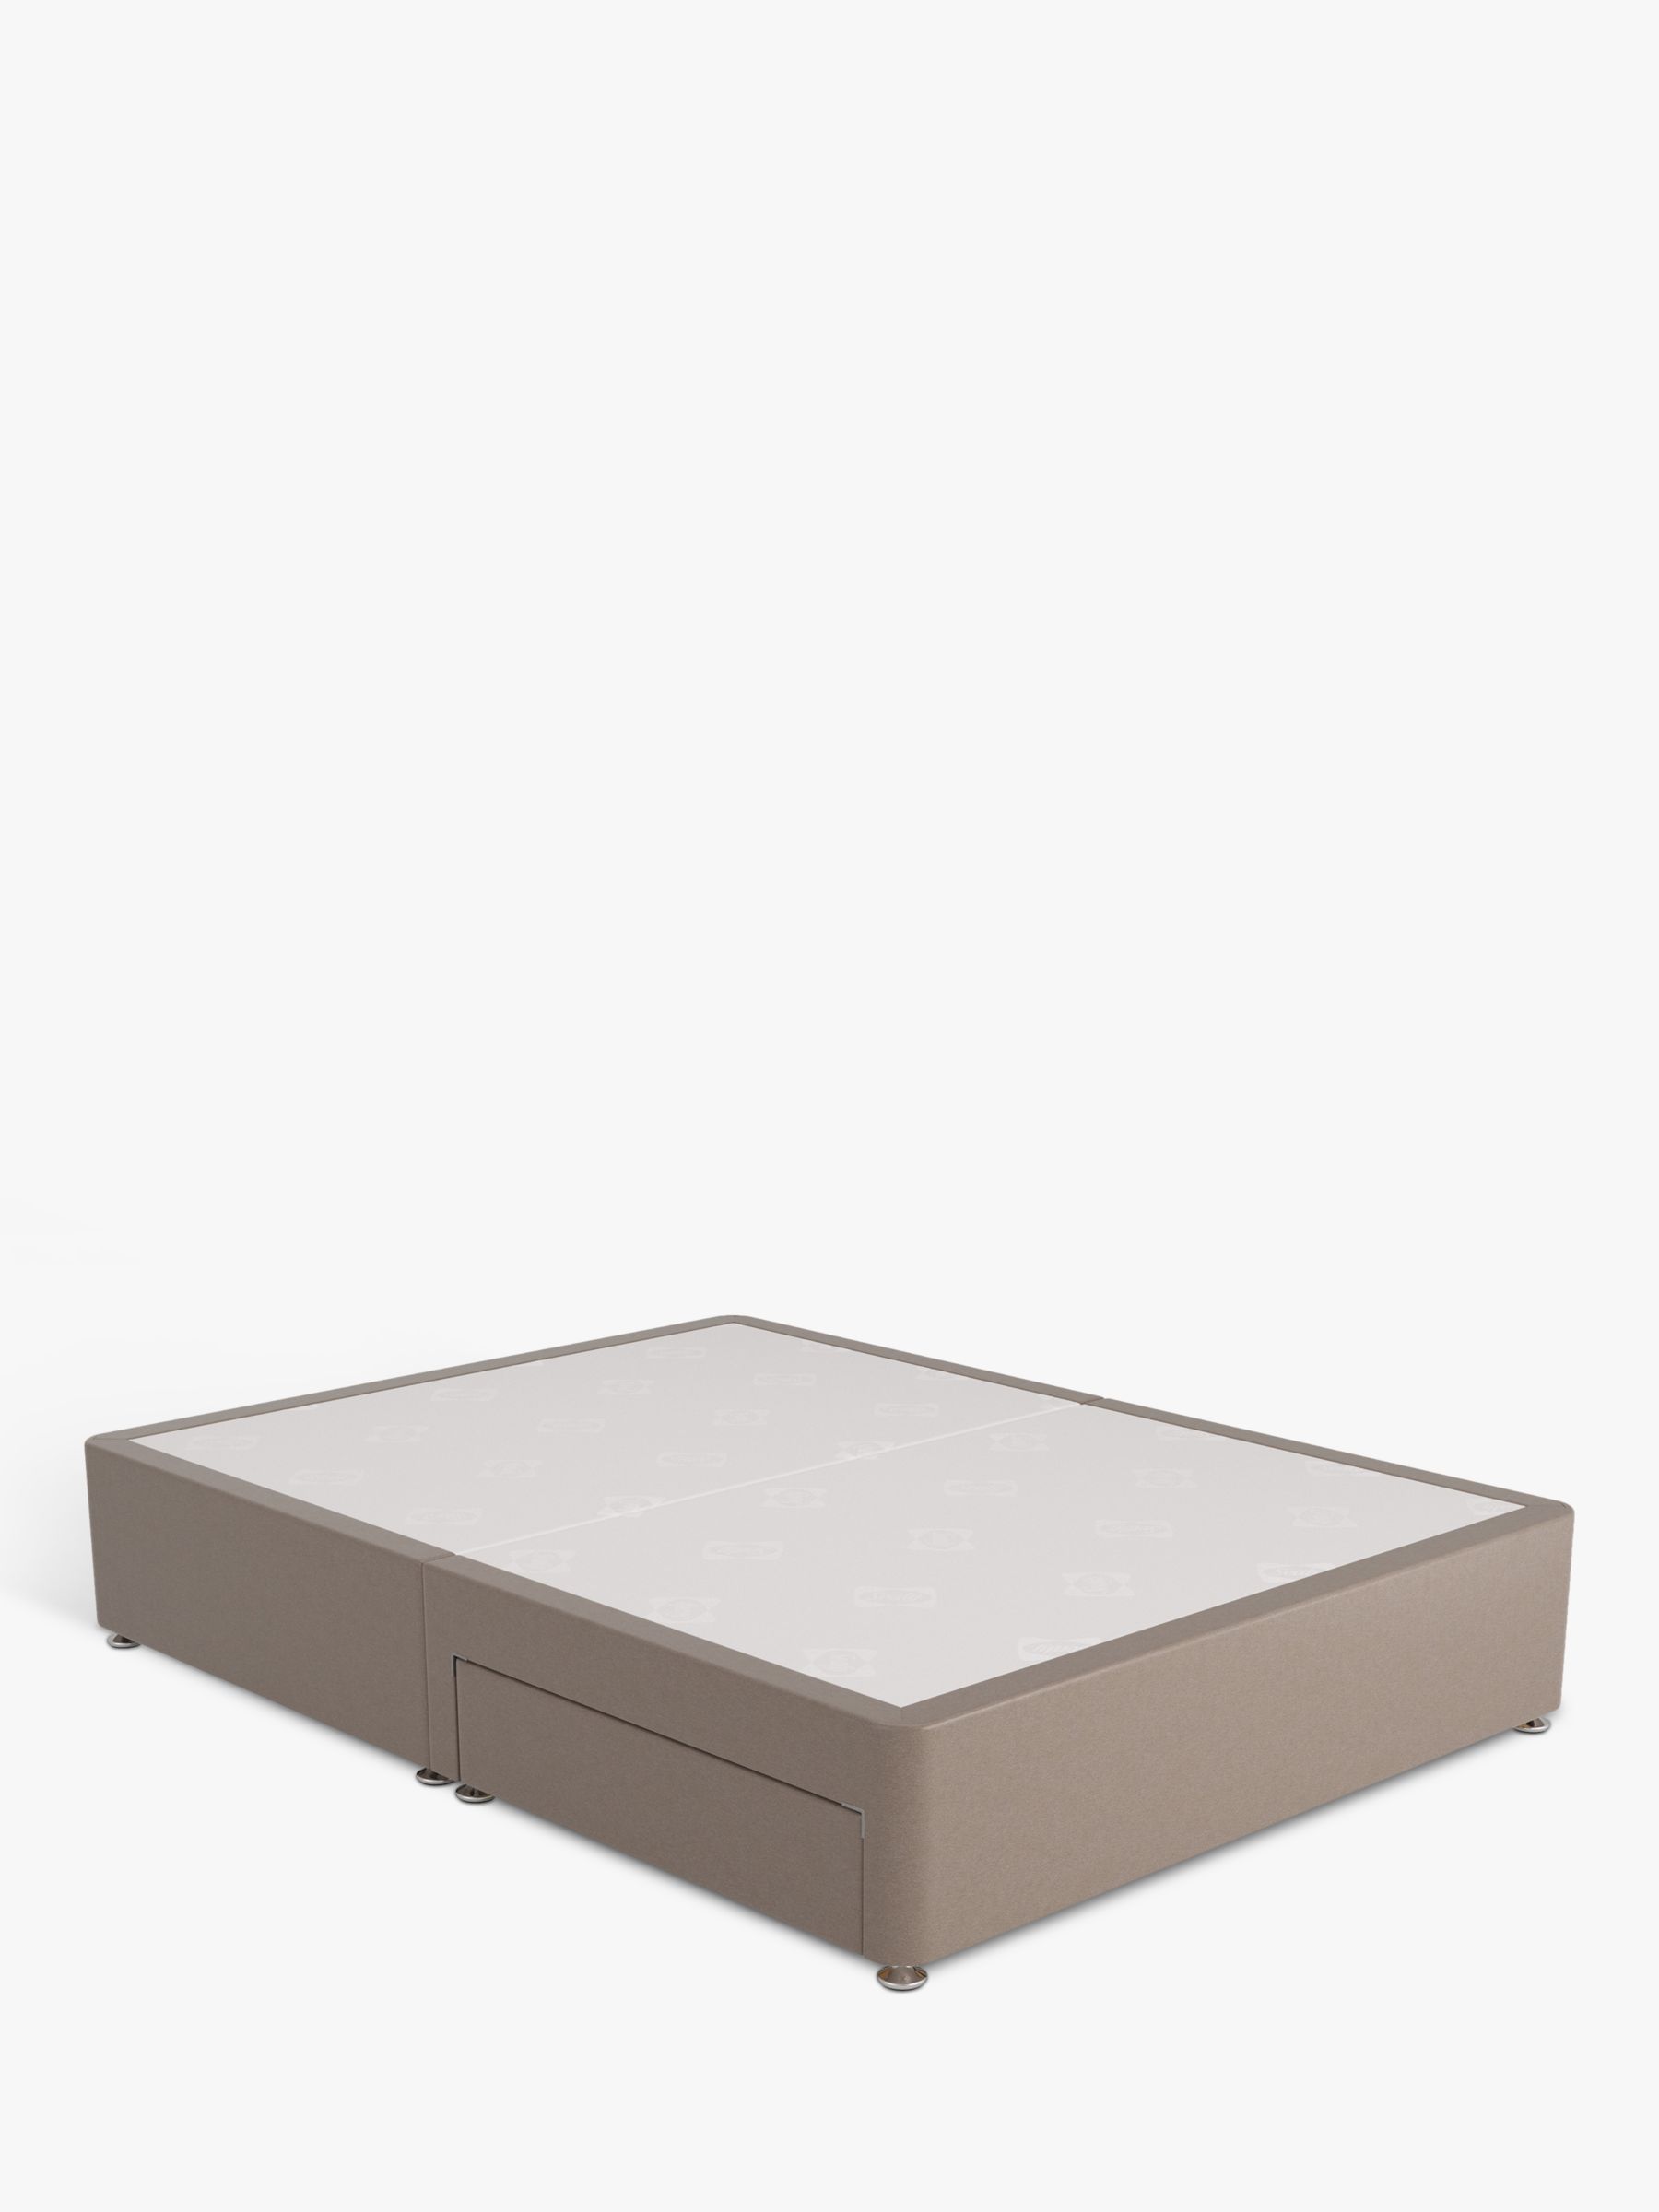 Photo of Sealy 2 drawer divan base double